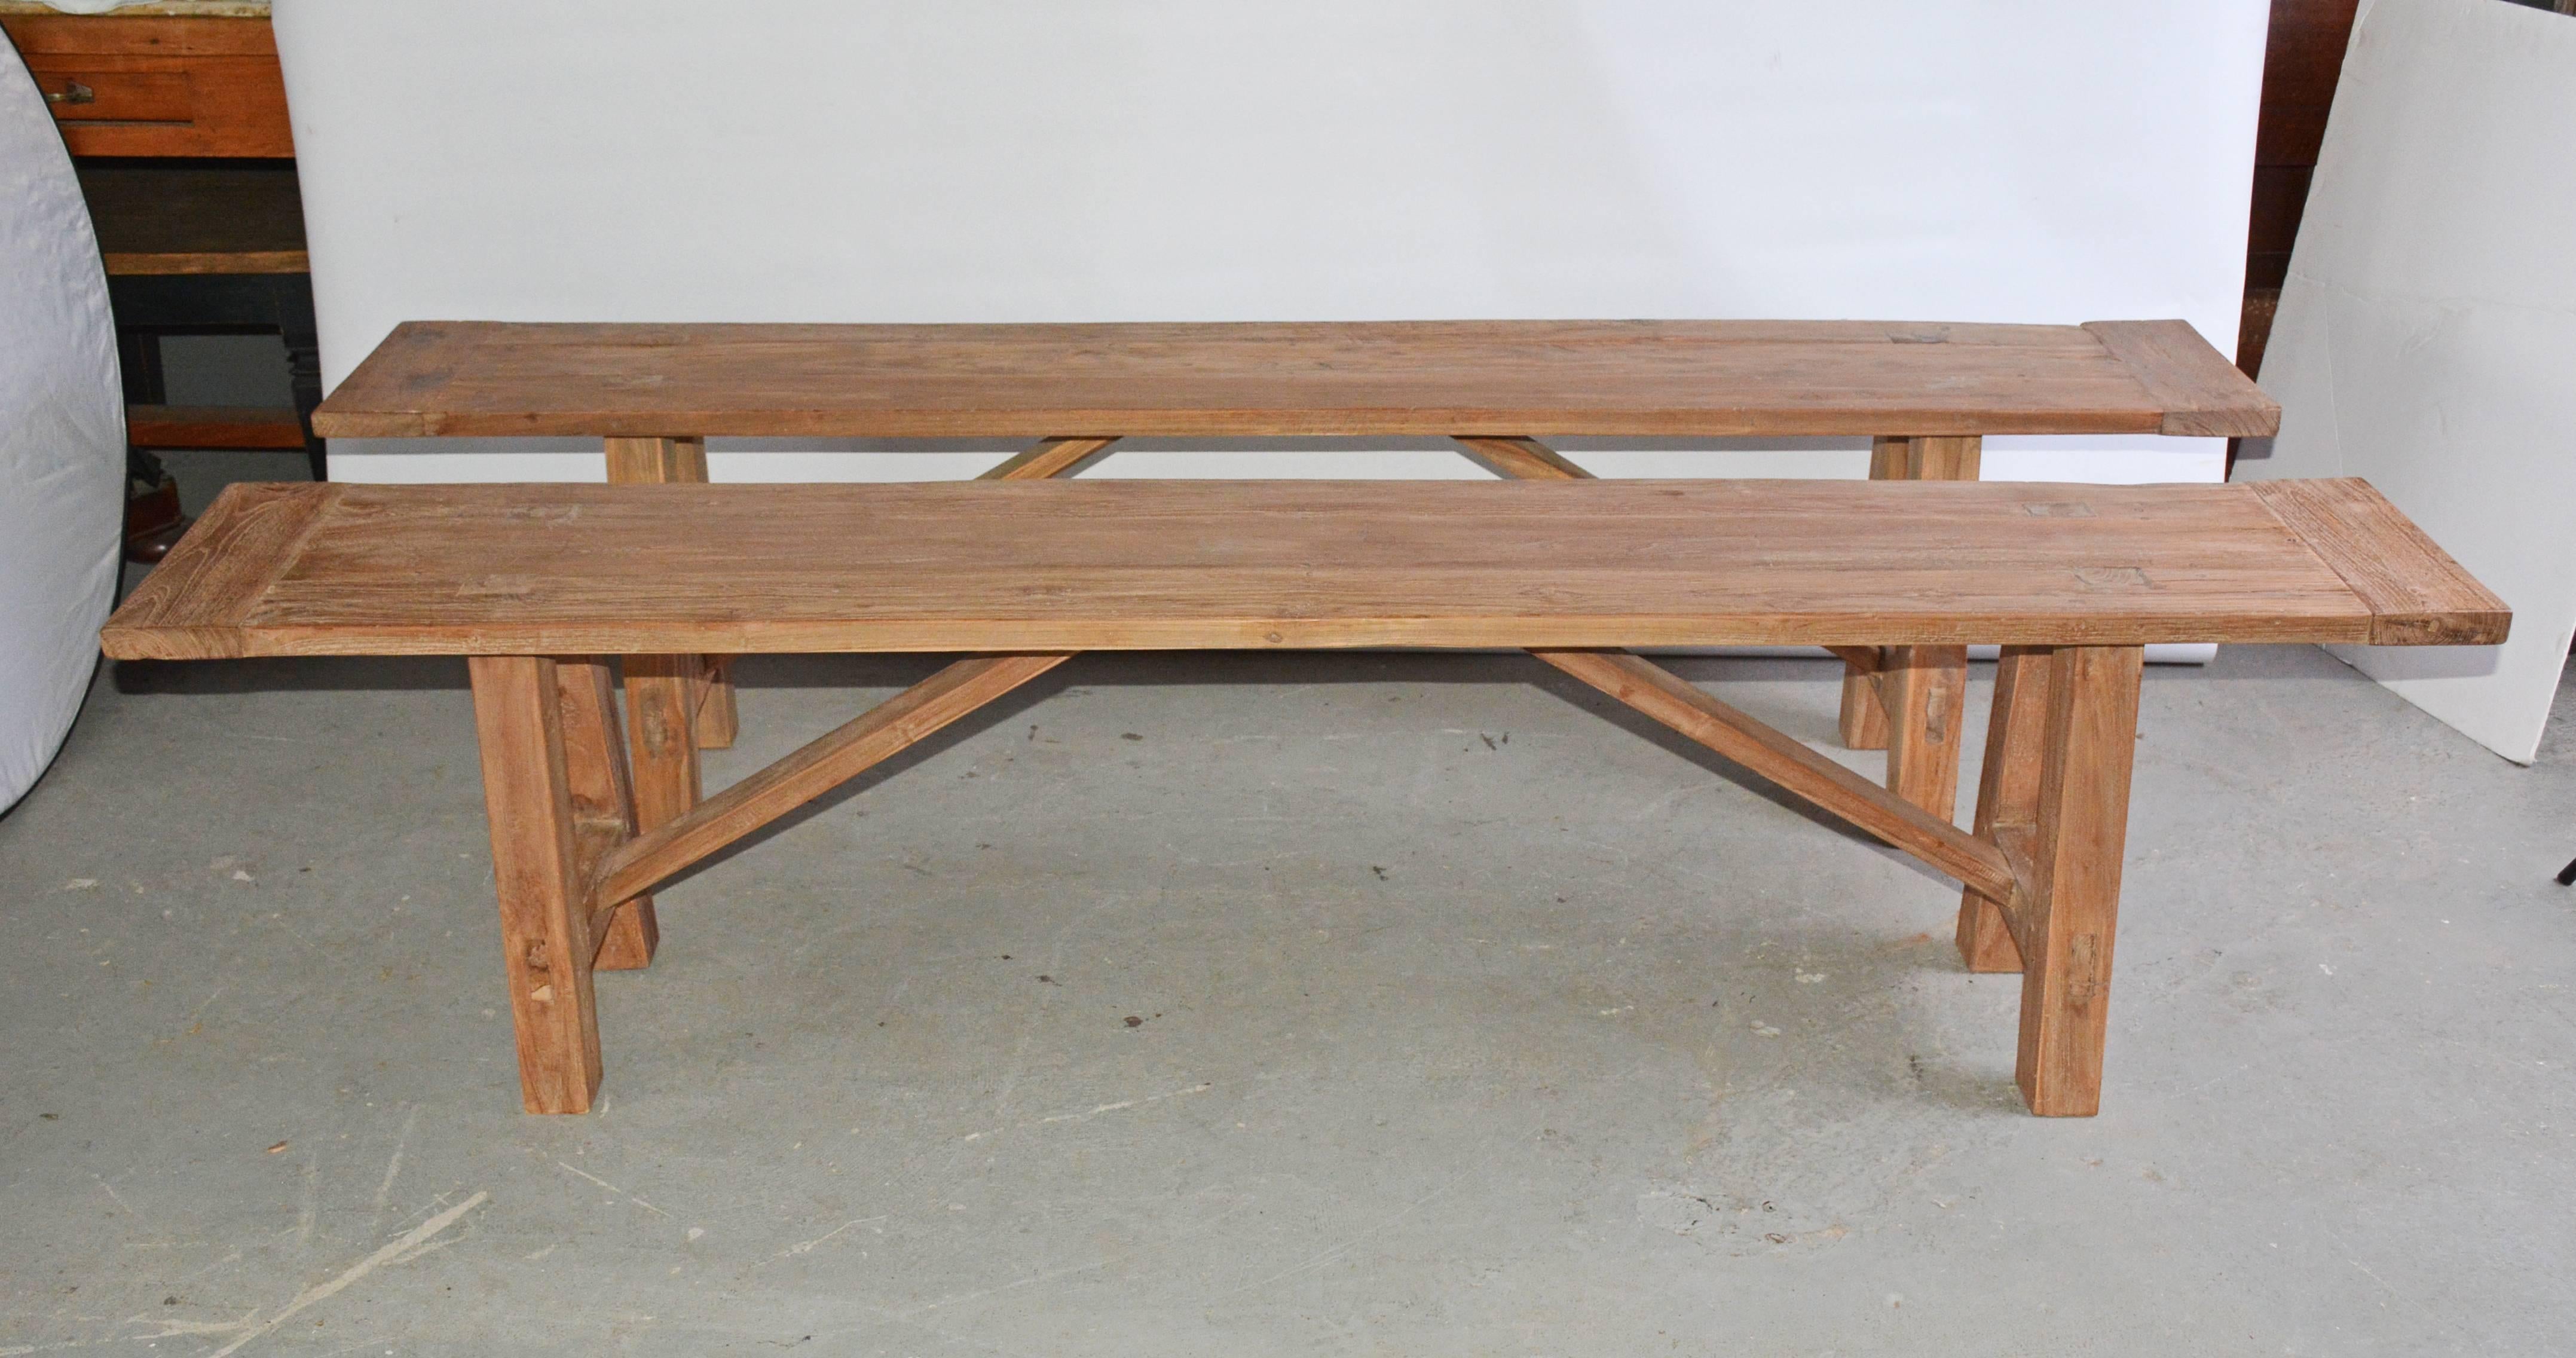 The pair of rustic indoor or outdoor teak benches has splayed legs, stretchers pegged into a breadboard top, stretchers and angled supports. Great for porch or garden dining seating. Newly made with reclaimed teak. Can be purchased individually.